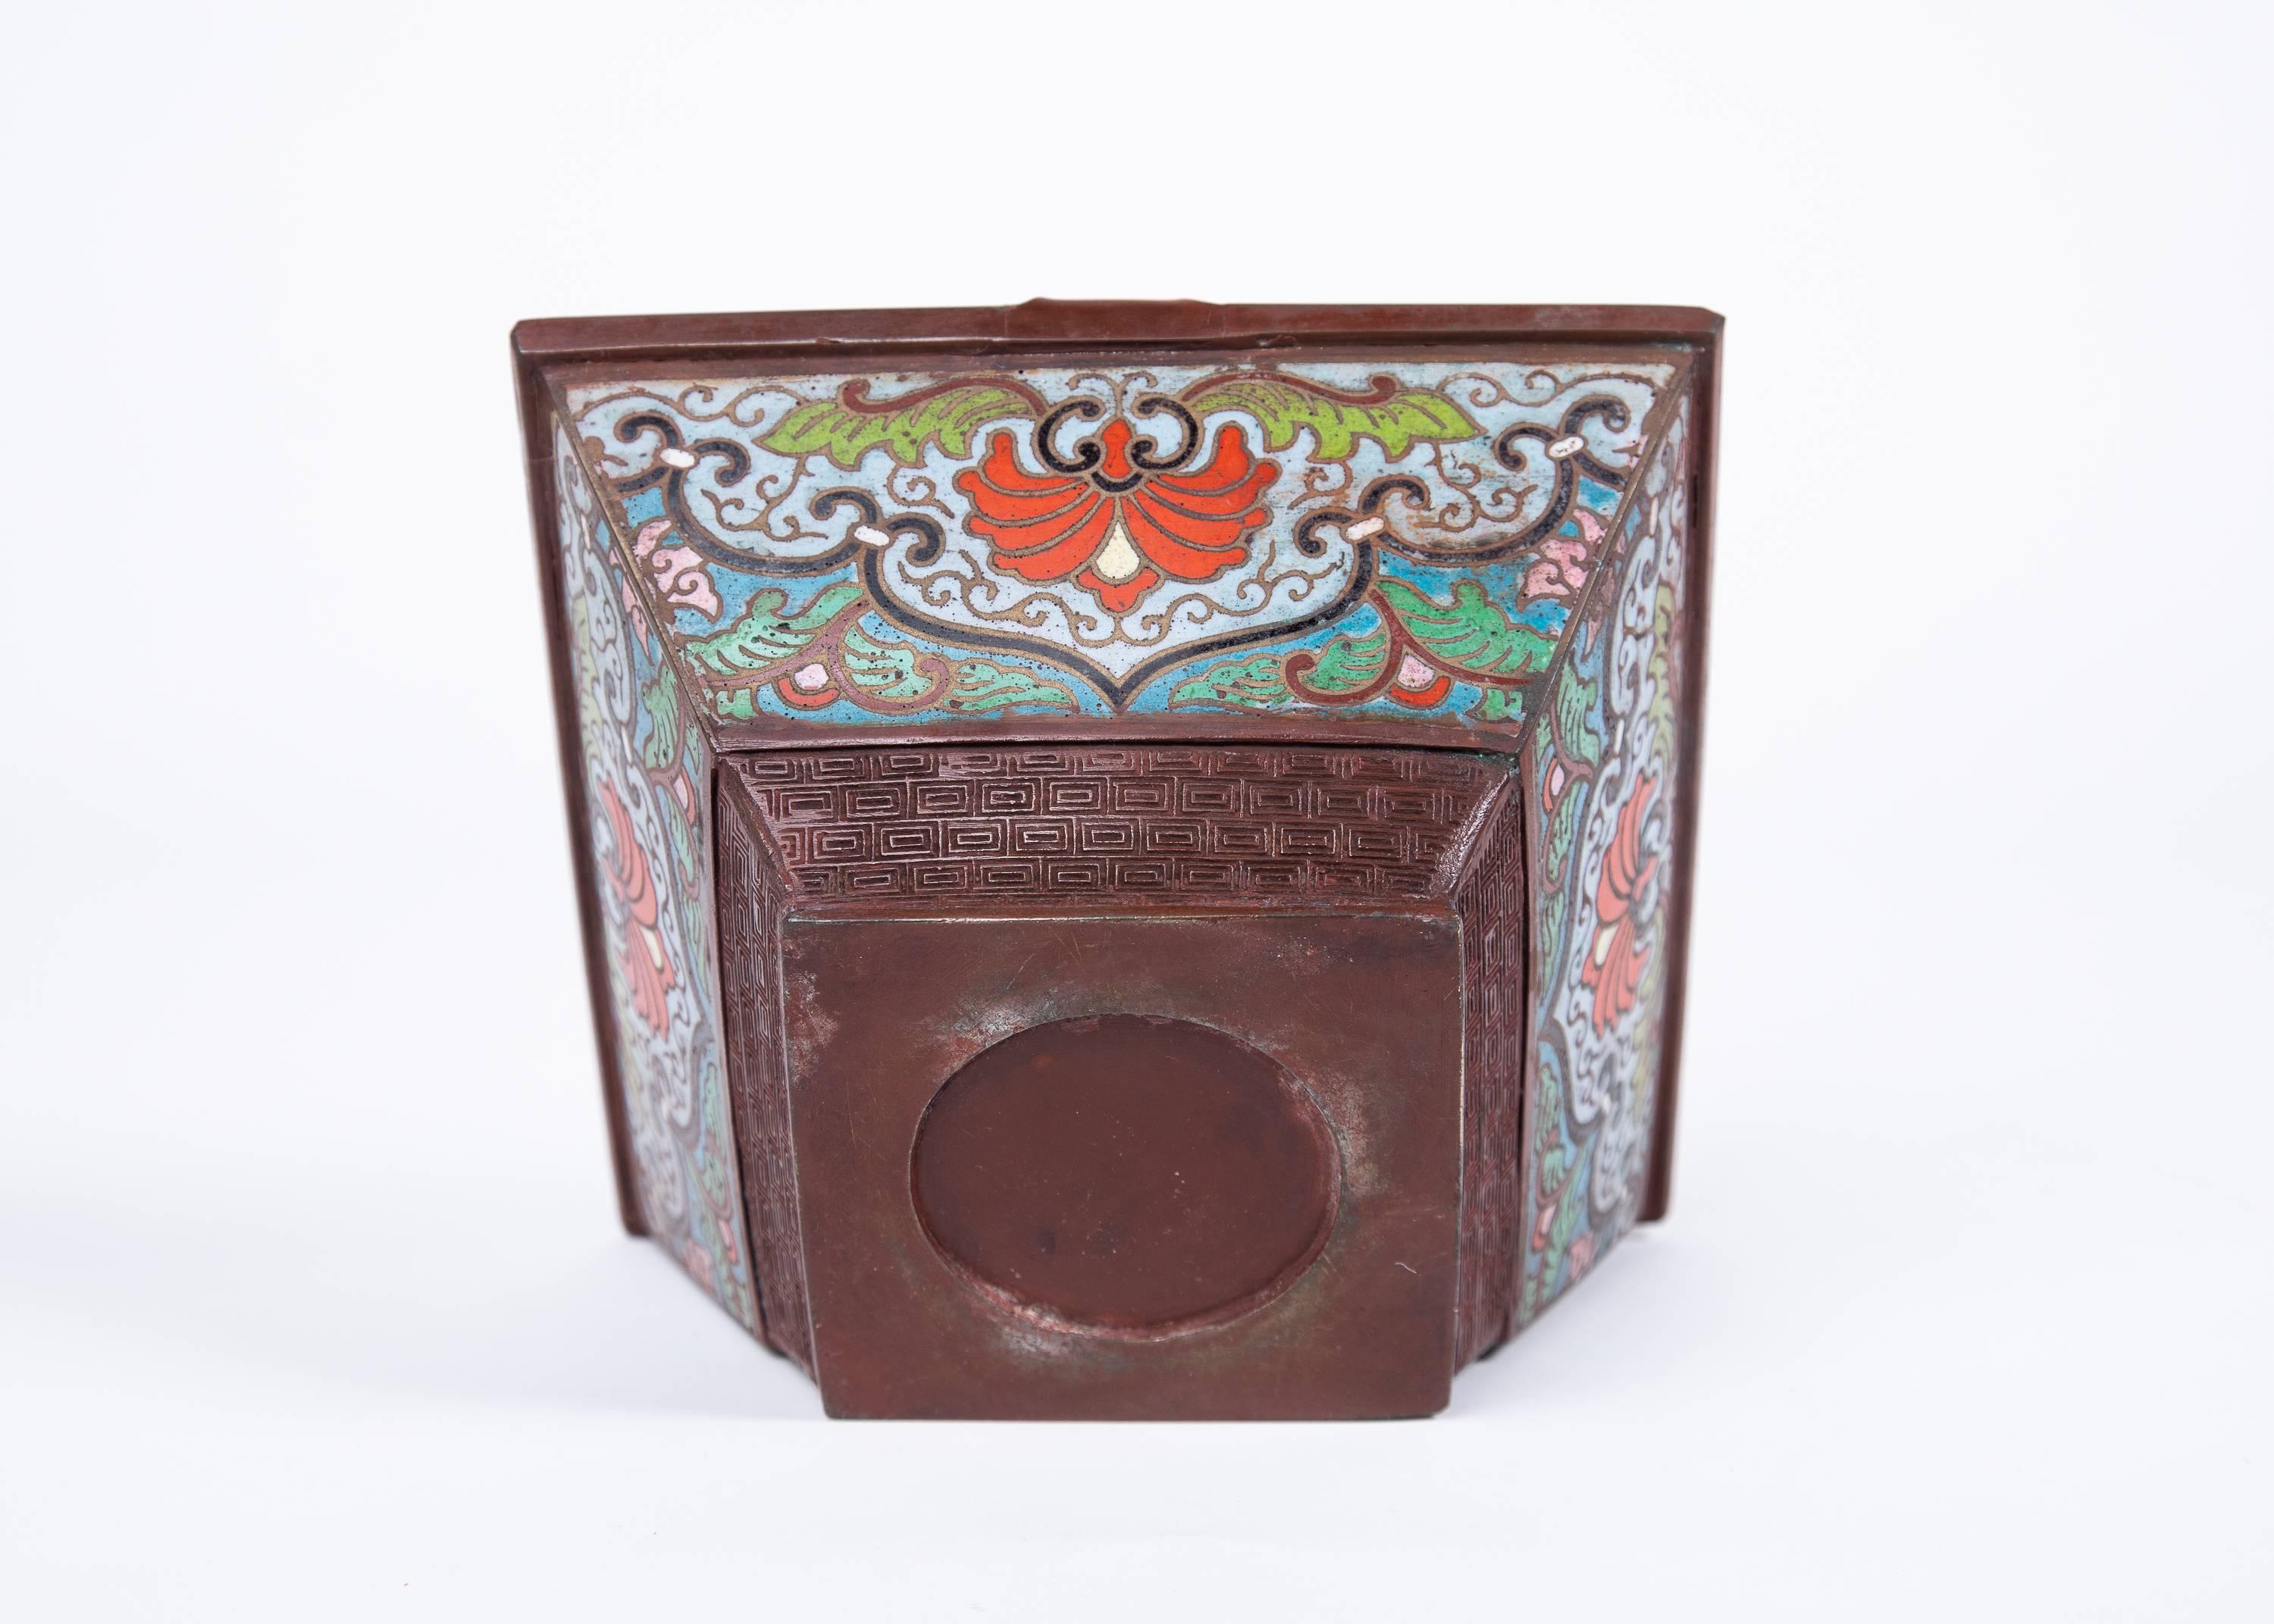 Antique champlevé cloisonné enamel on copper square jardinière. With bat design on each side. They are flying through the clouds and sky, above the four corners of nature. .Japan, early 20th century.